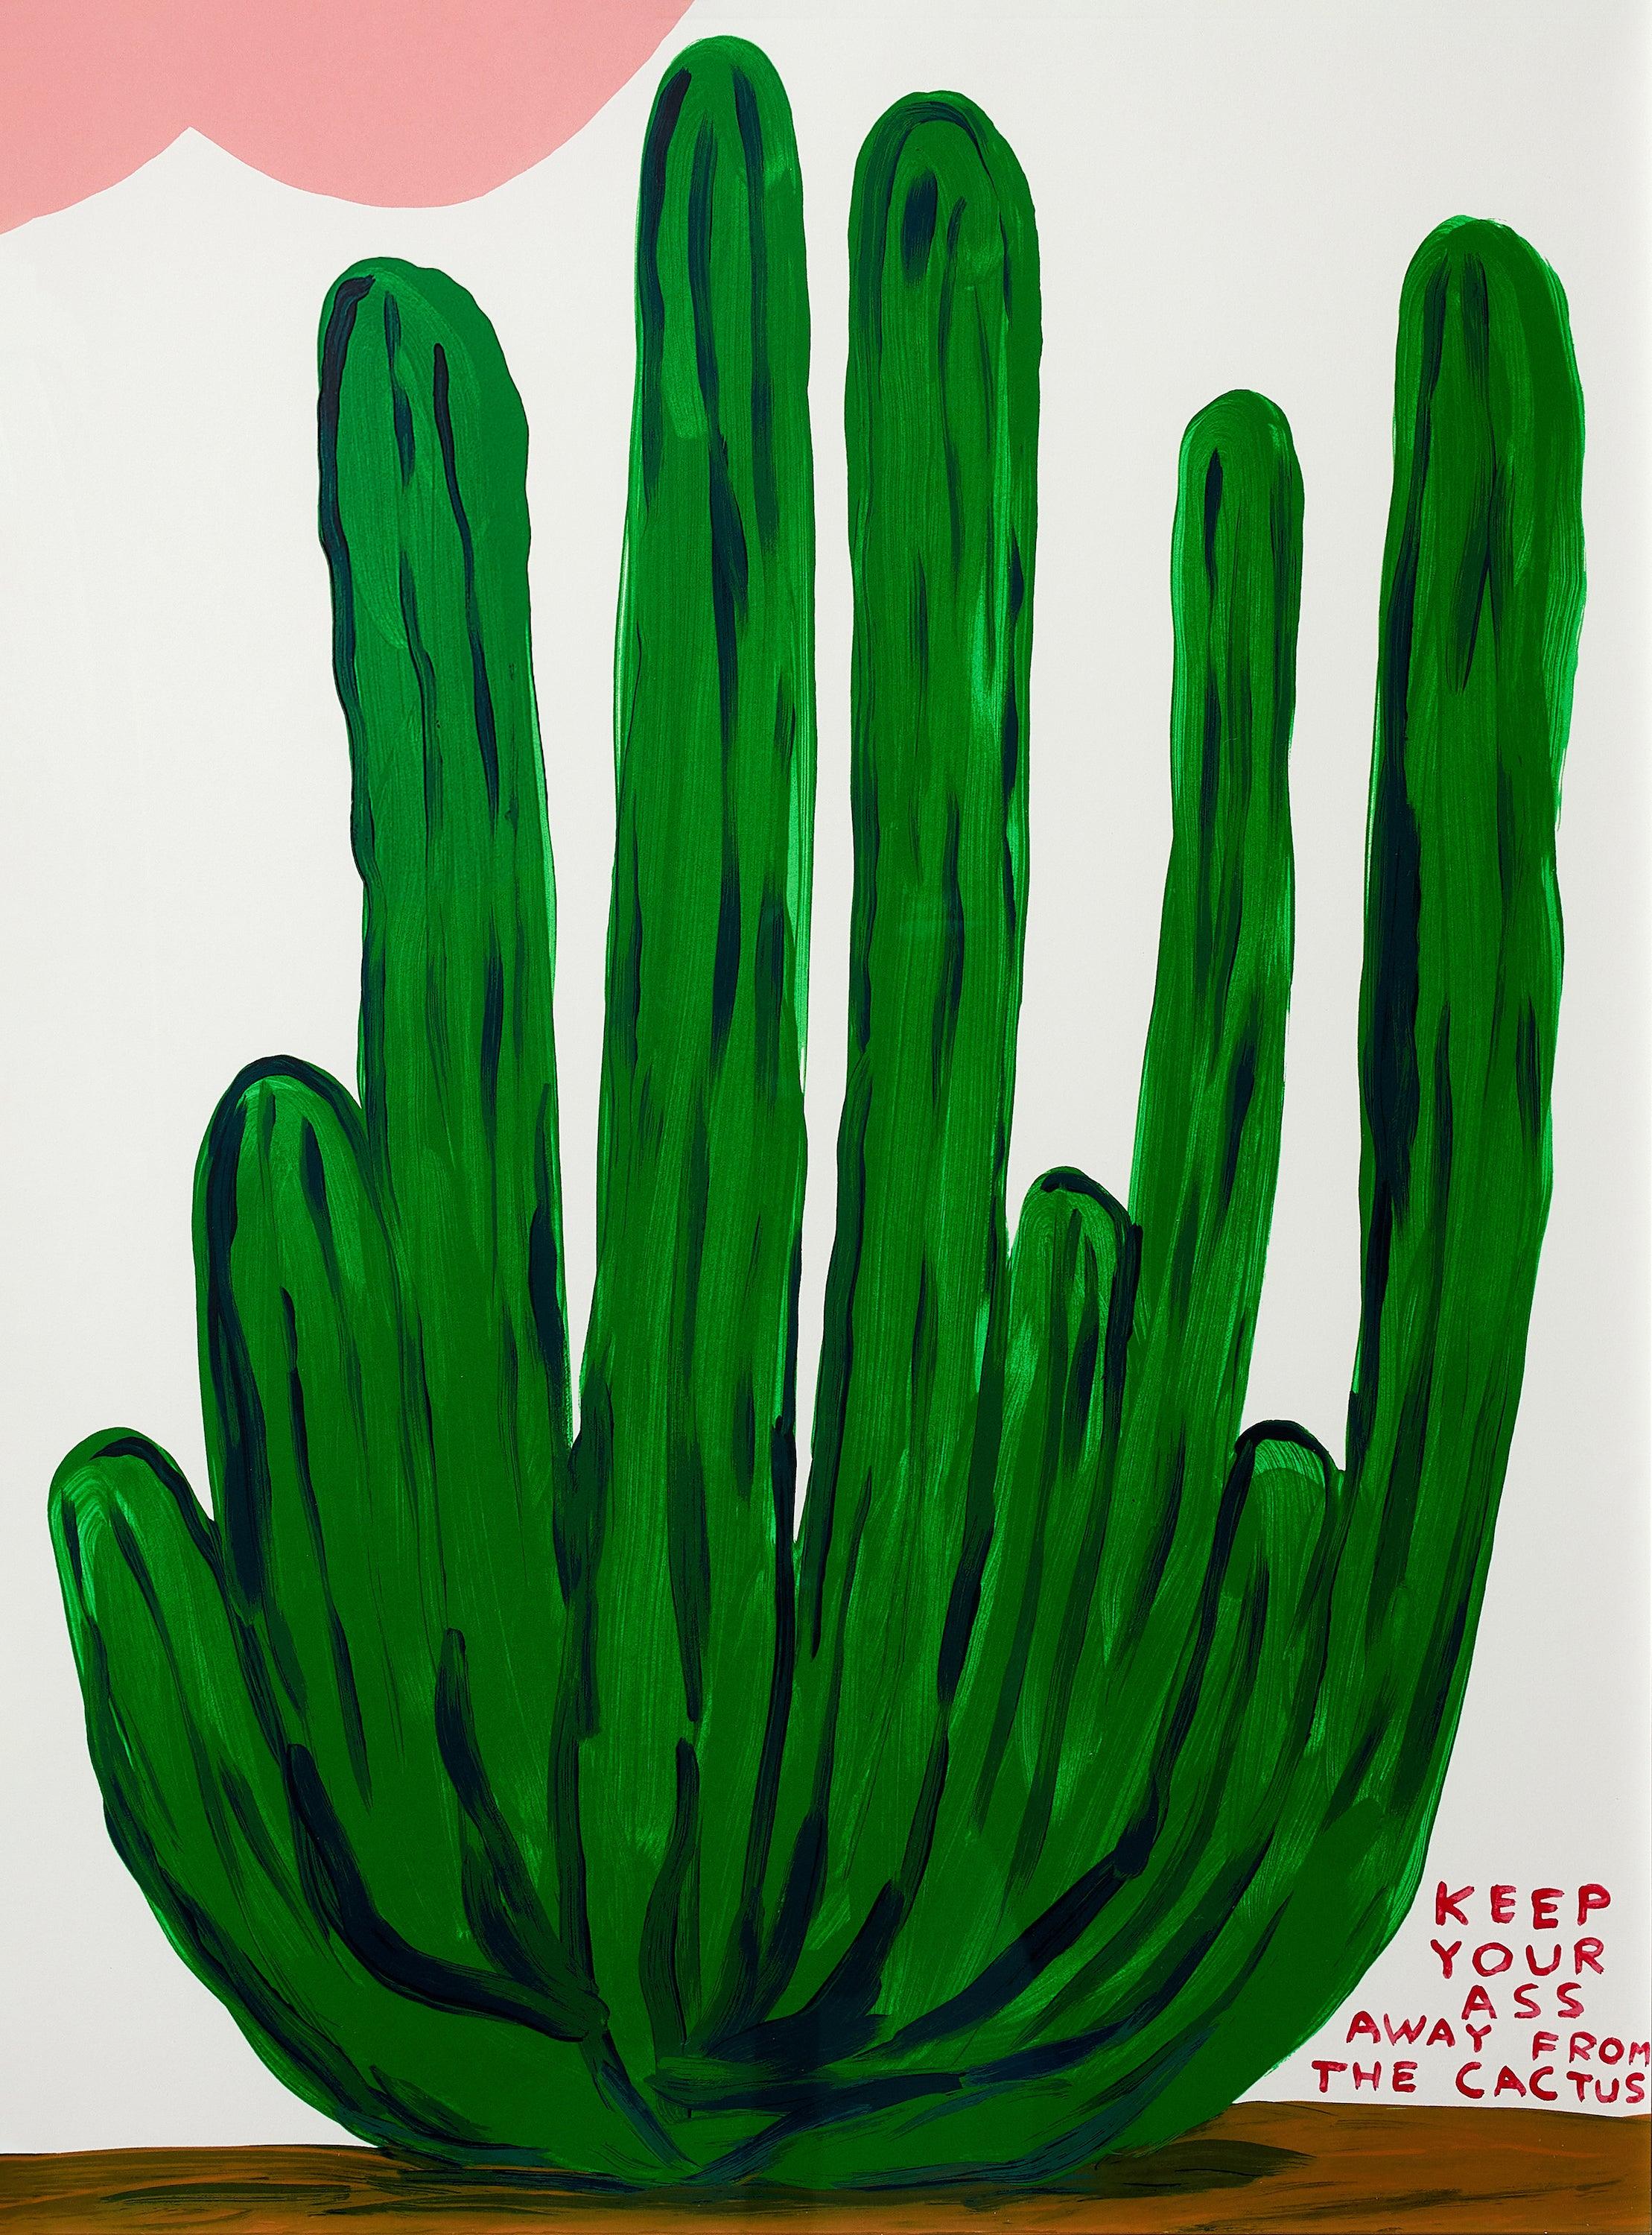 Keep Your Ass Away From The Cactus -- Screenprint, Flowers, Text Art by Shrigley